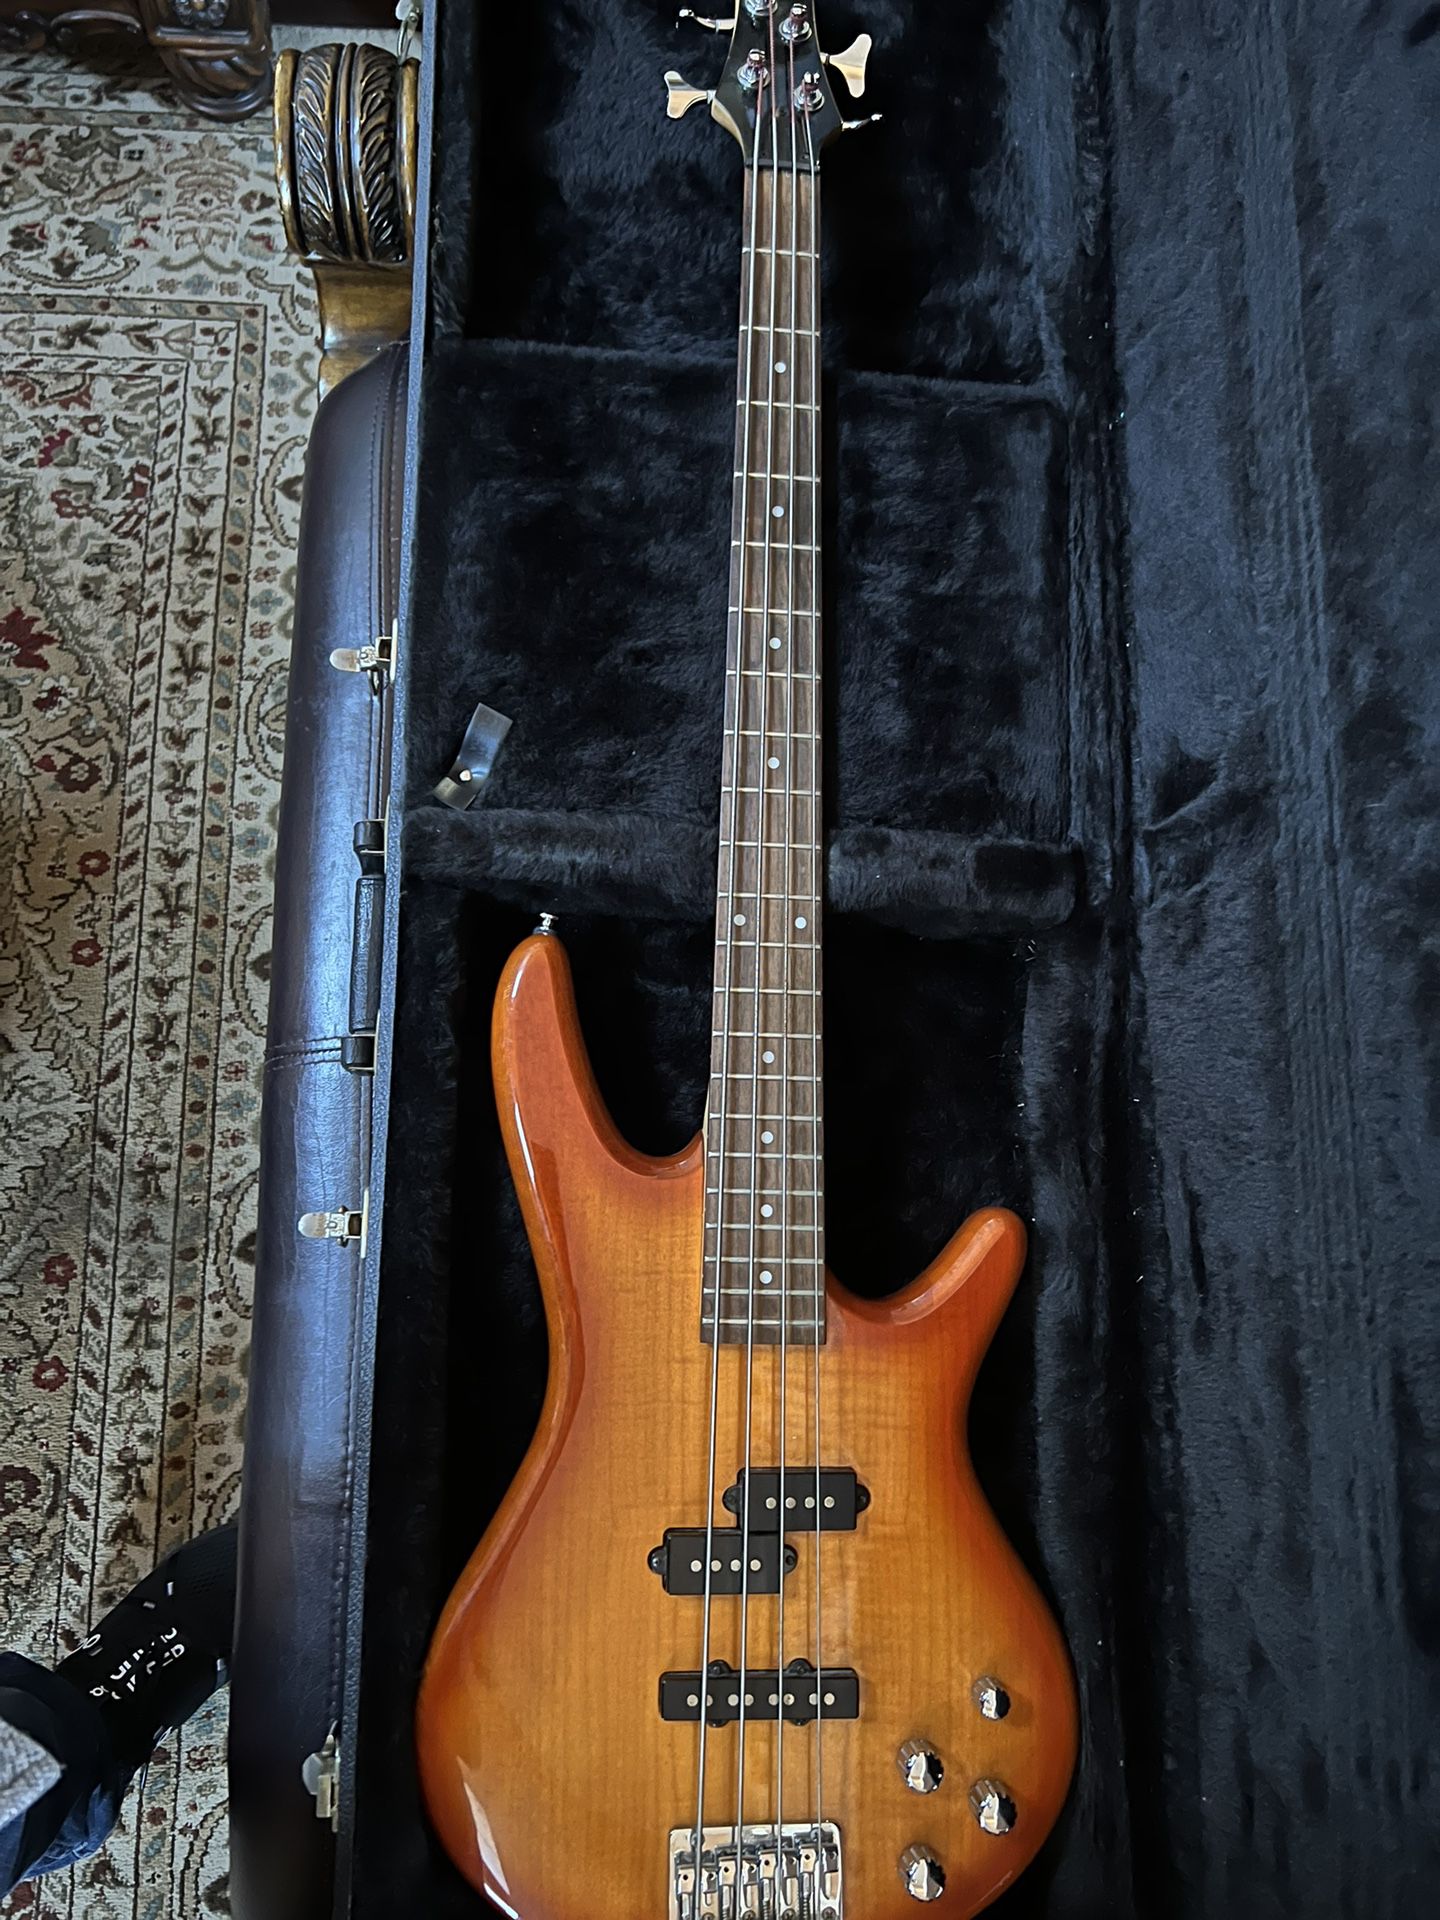 Ibanez Bass Guitar with hard case